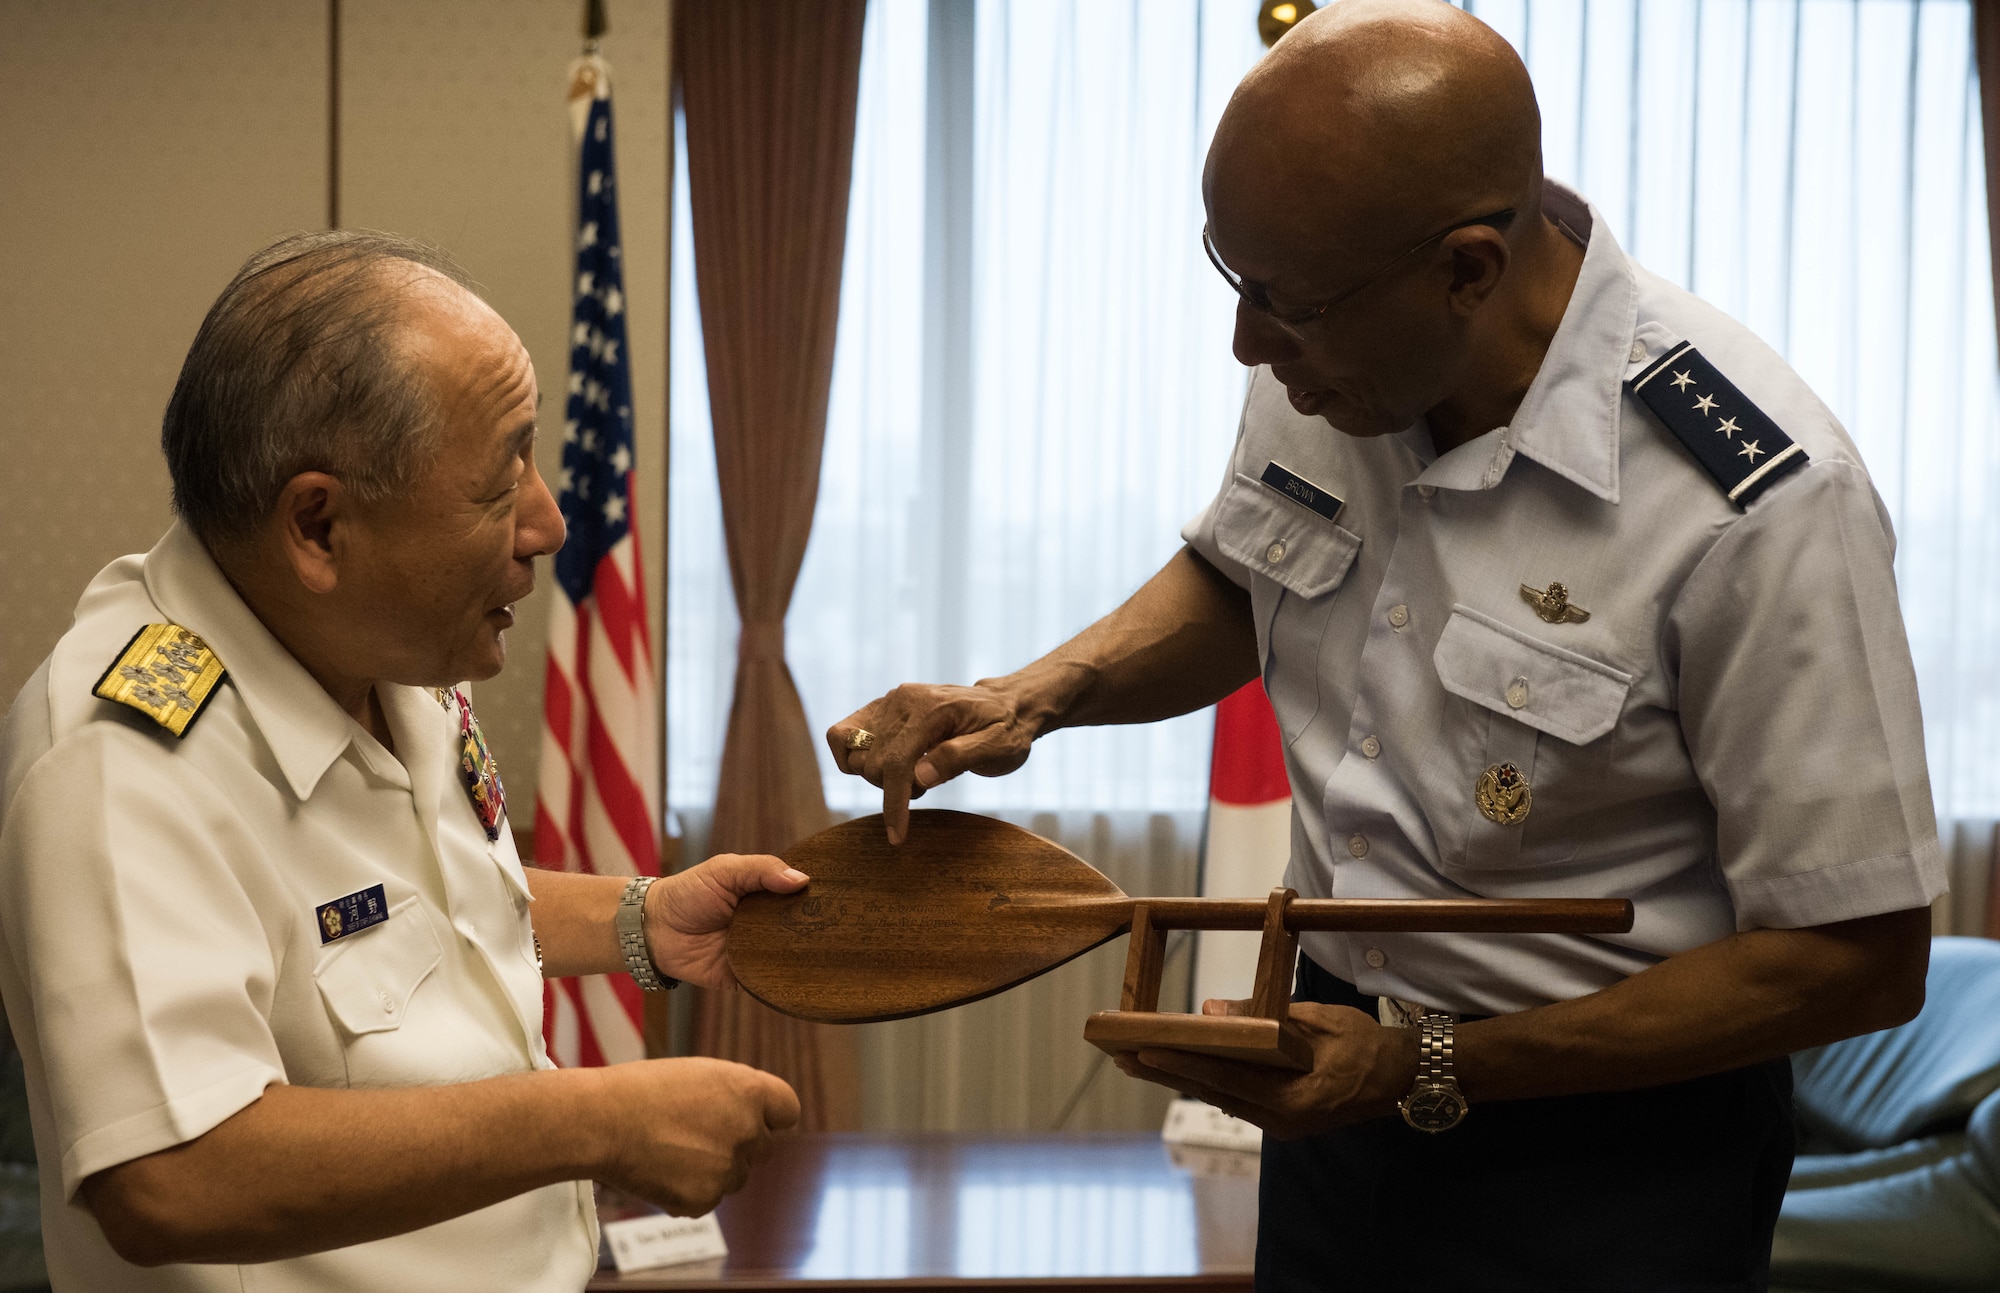 Gen. CQ Brown, Jr., Pacific Air Forces commander, presents a gift to ADM Katsutoshi Kawano, Japanese Chief of Joint Staff, after an office call with him at the Ministry of Defense in Tokyo, Japan, Aug. 7, 2018. Brown visited the country to affirm the United States' shared commitment to a free and open Indo-Pacific as well as to seek opportunities to enhance cooperation and coordination across the alliance. For more than 60 years, the U.S.-Japan alliance has been the cornerstone for stability and security in the region. (U.S. Air Force photo by Hailey Haux)